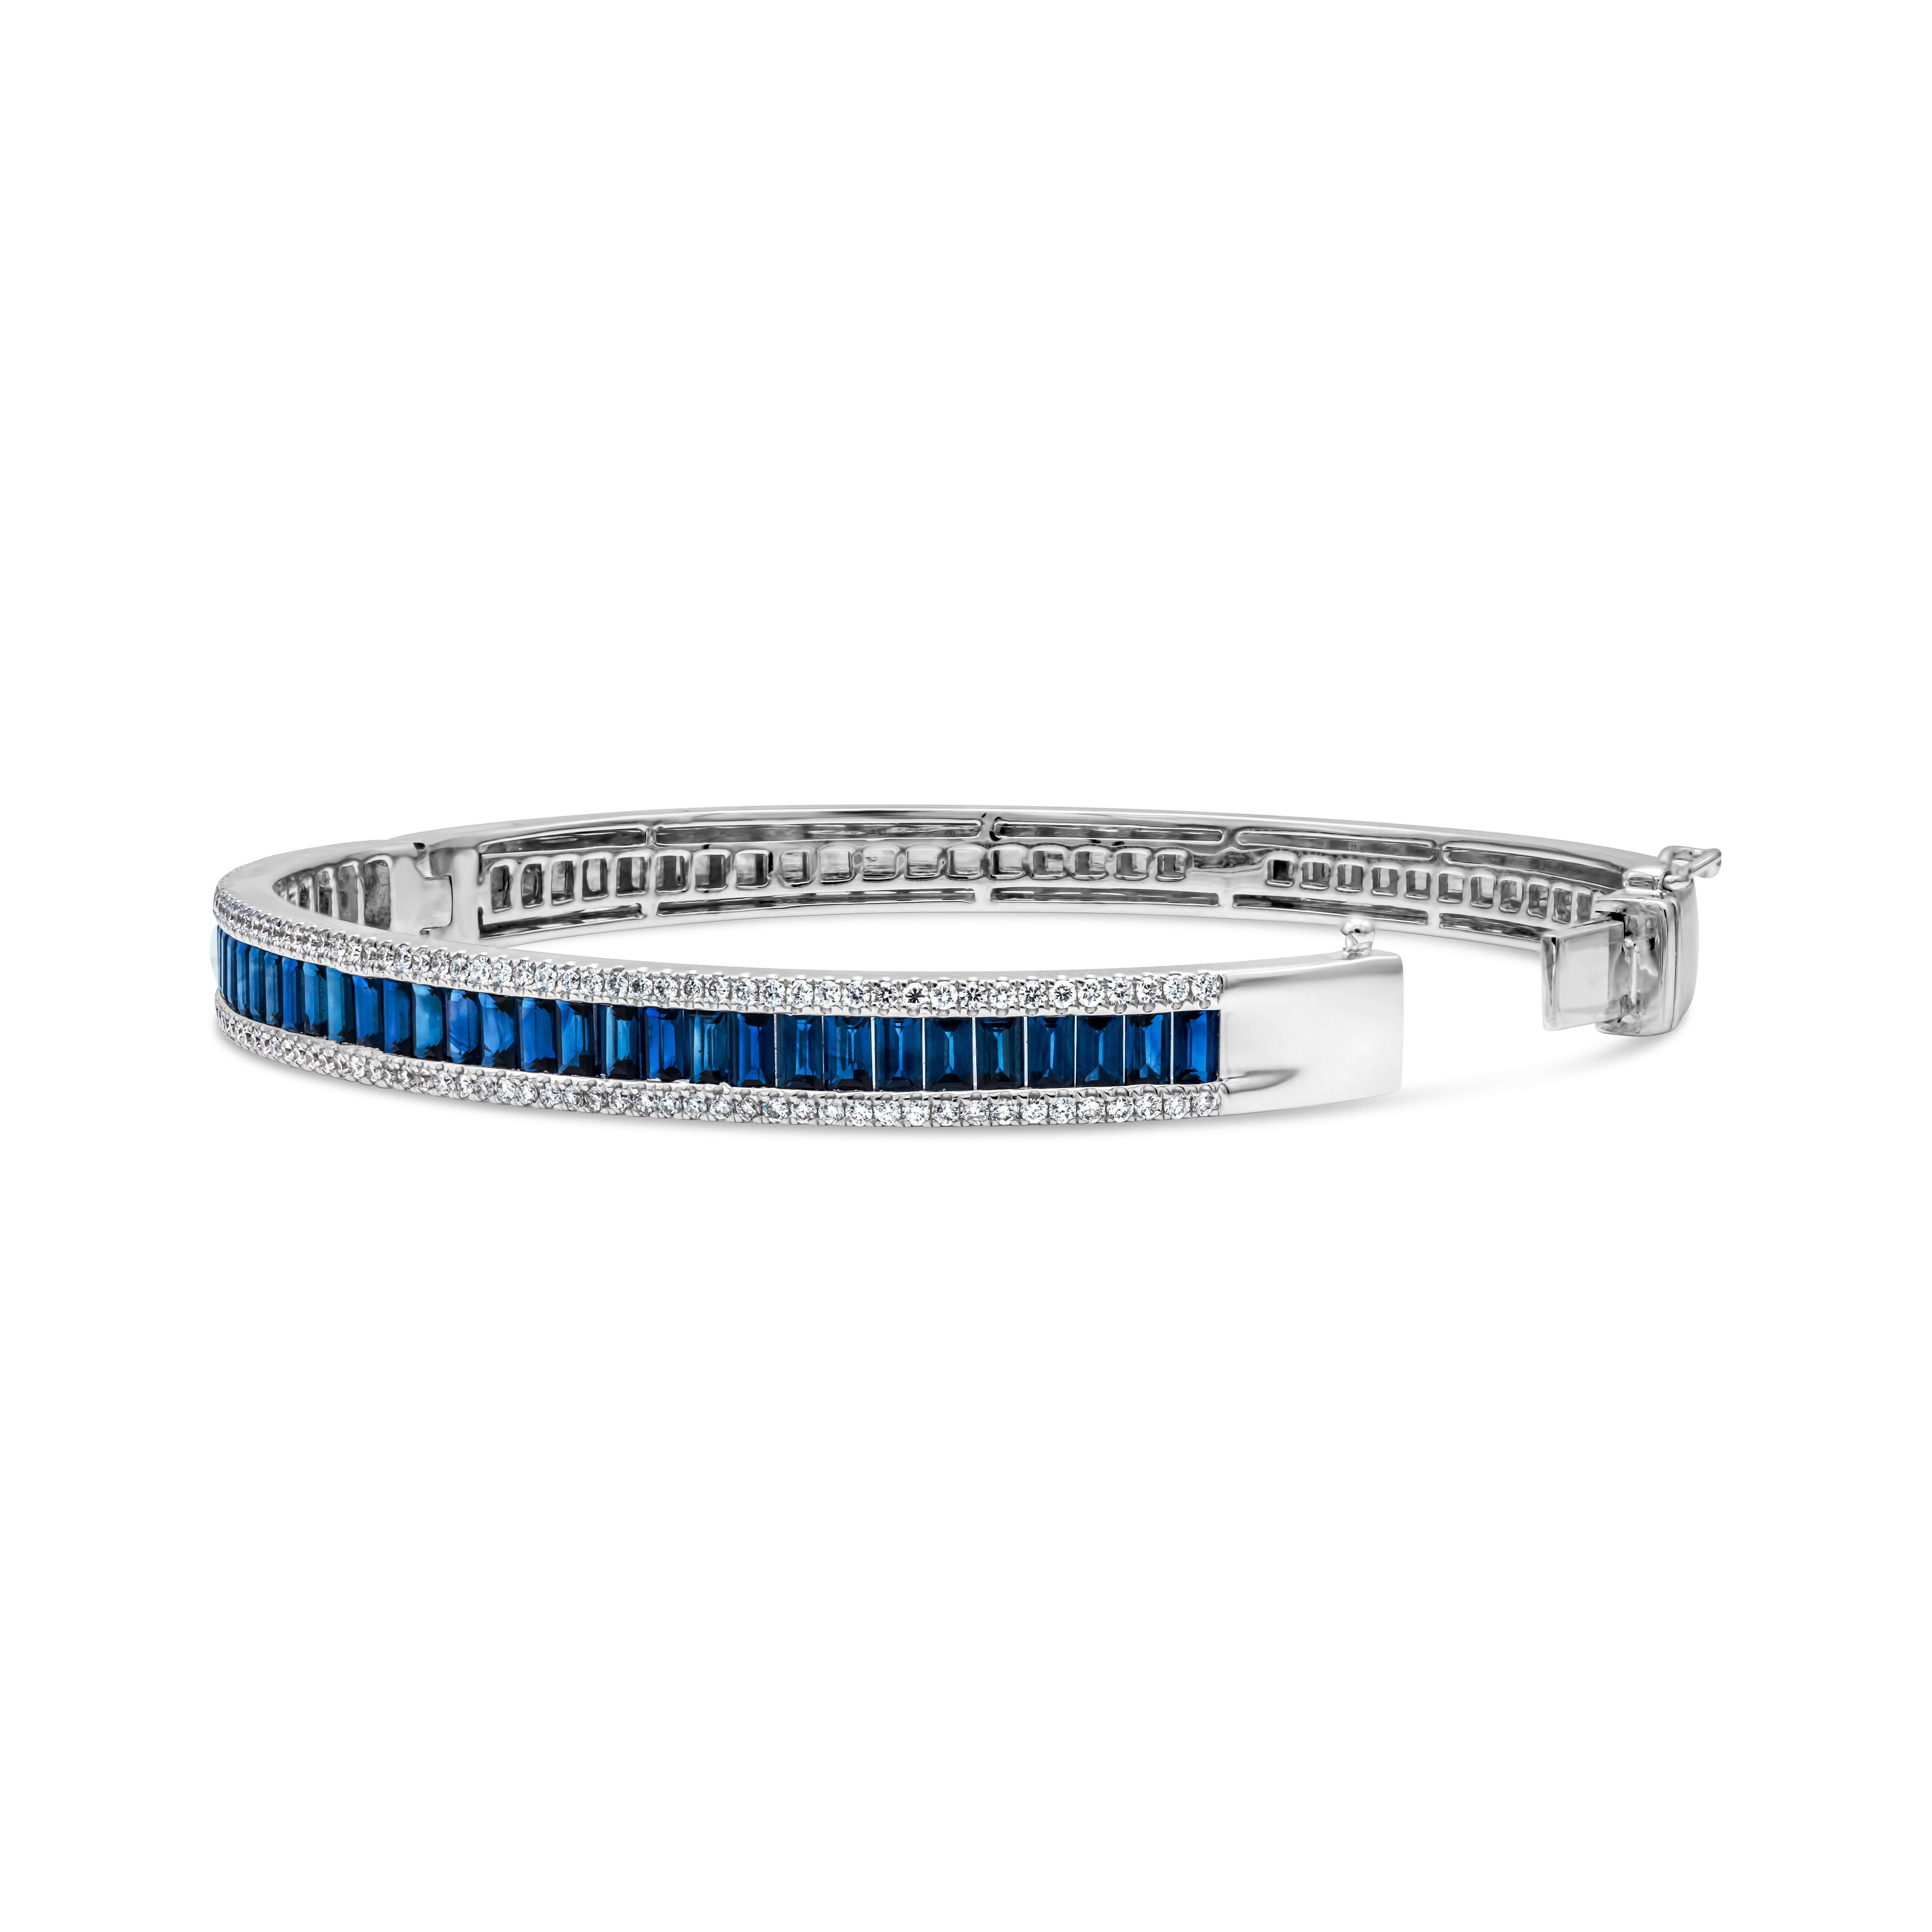 A brilliant & classic bangle bracelet showcasing a row of 34 baguette cut color-rich blue sapphires weighing 3.84 carats total, BS in clarity. Accented by 118 brilliant round cut diamonds weighing 0.71 carat total, G color and SI in clarity. Finely